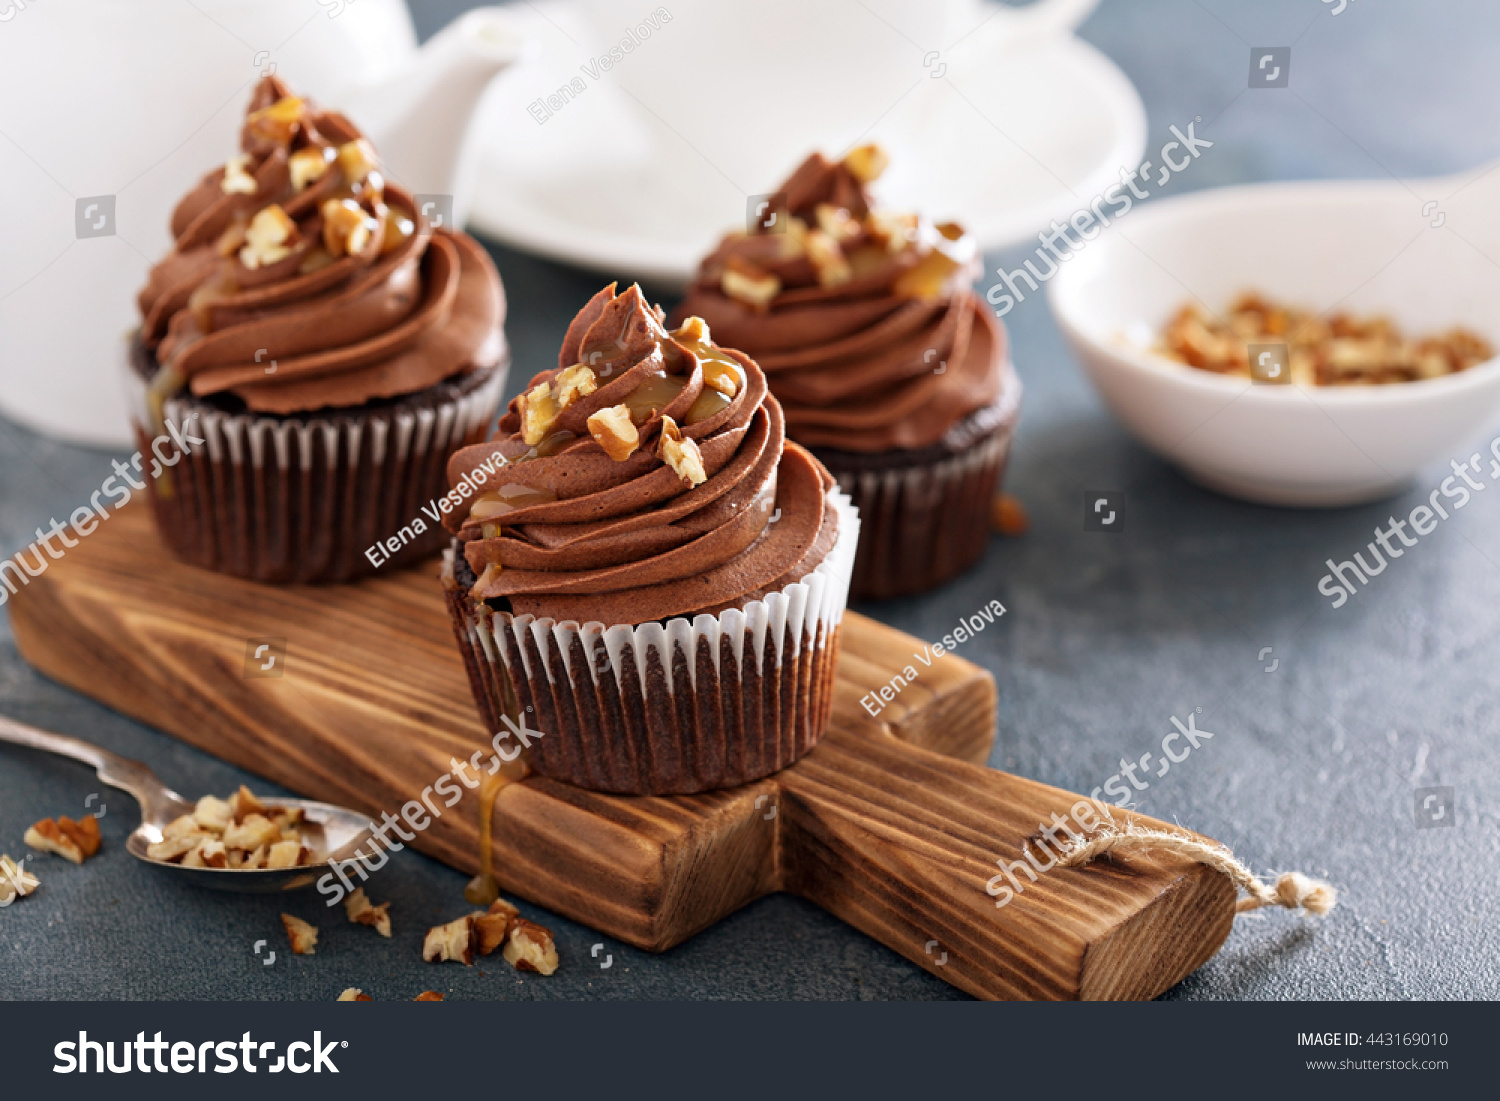 Chocolate caramel cupcake with nuts and butterscotch syrup #443169010